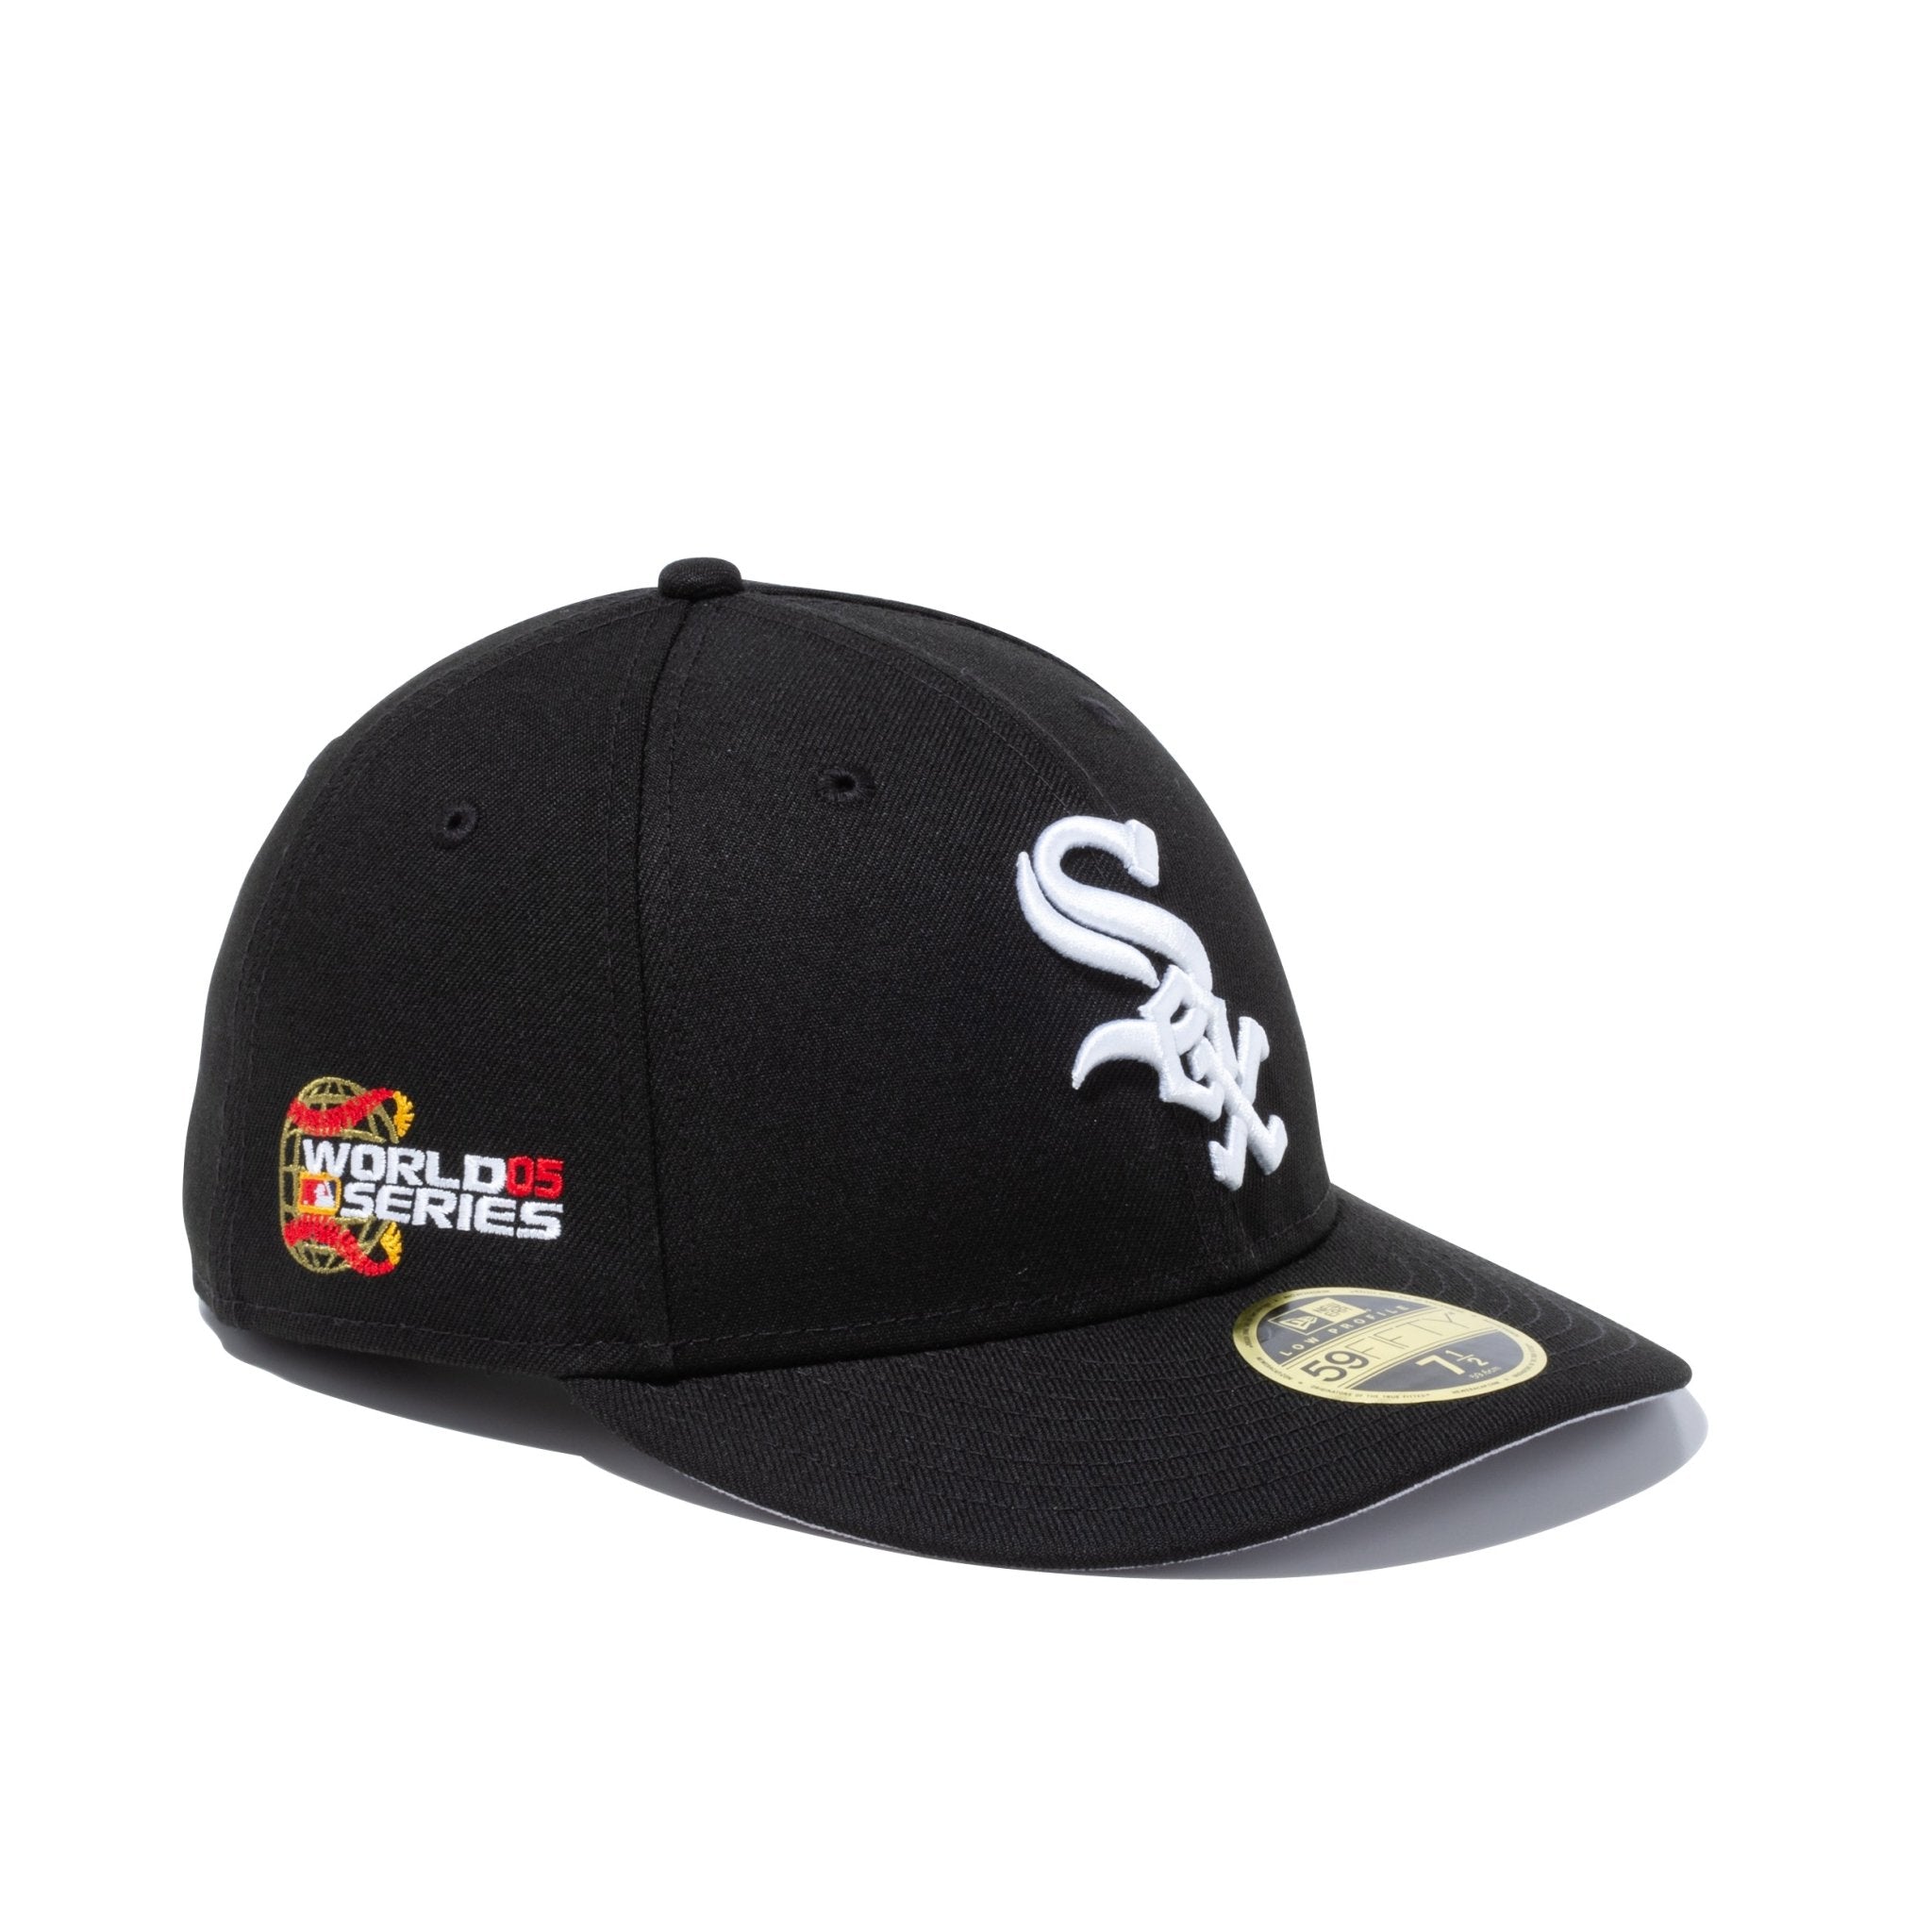 LP 59FIFTY Side Patch World Series シカゴ・ホワイトソックス